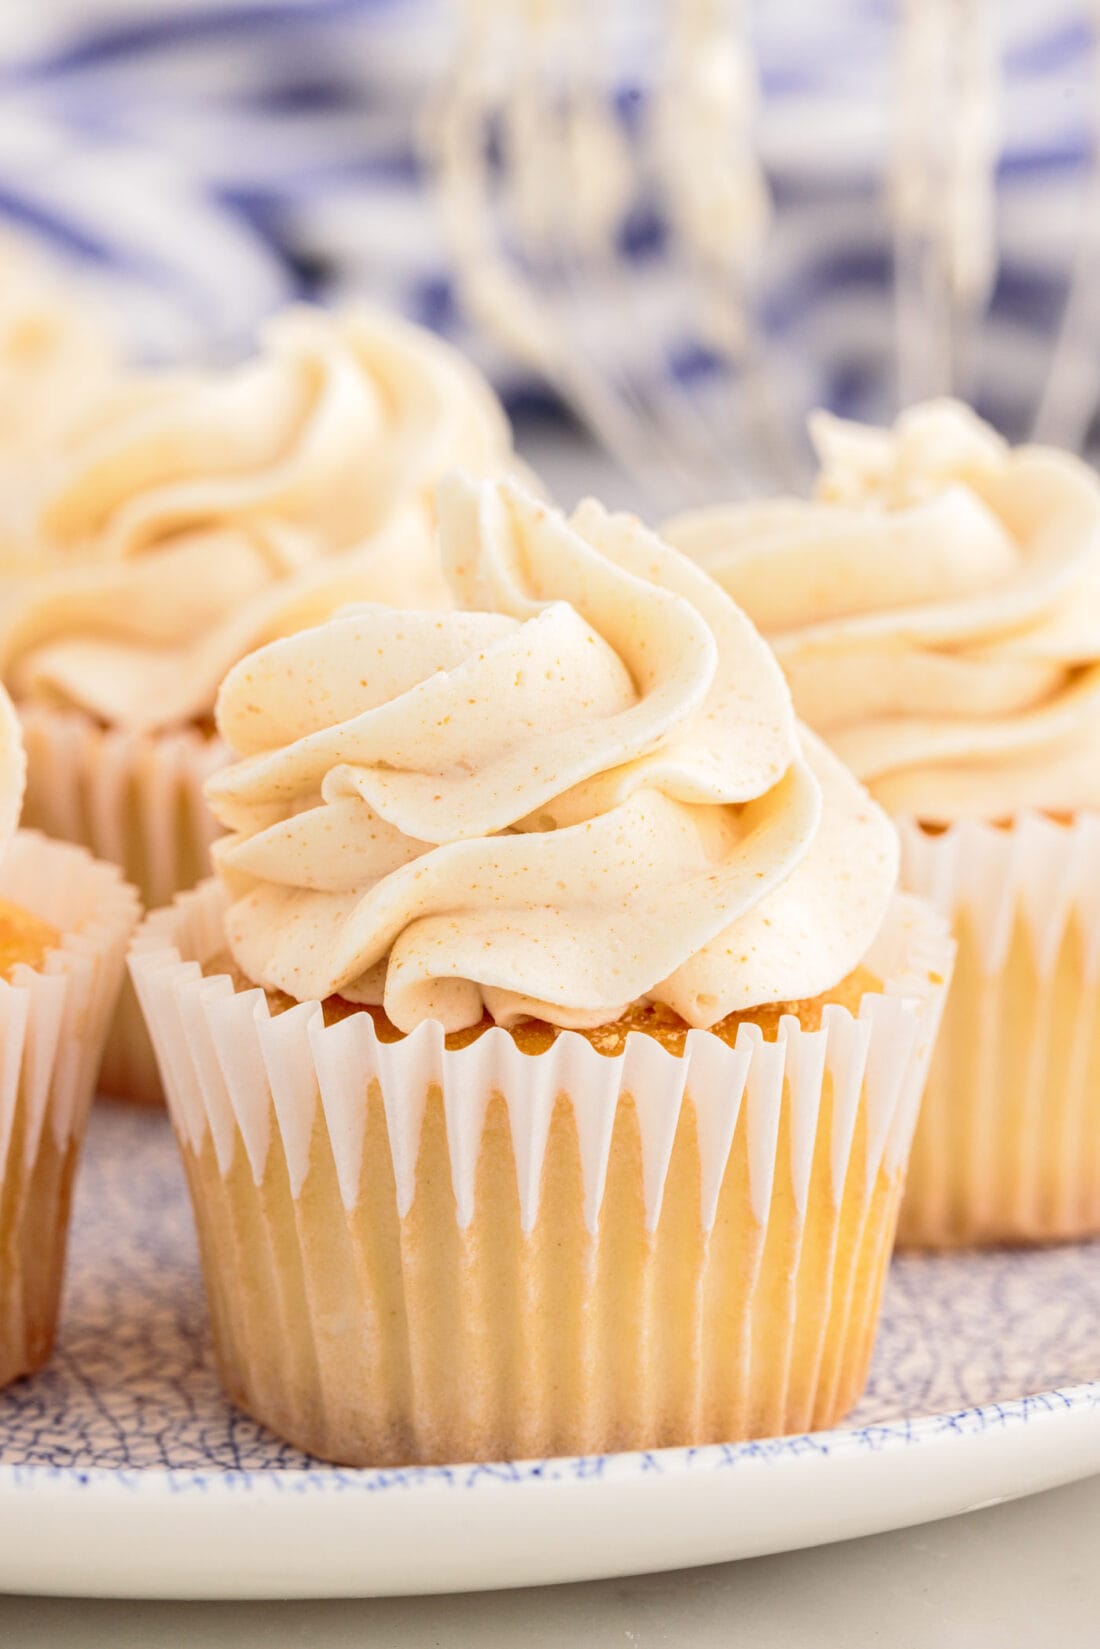 Cupcakes topped with Brown Butter Frosting